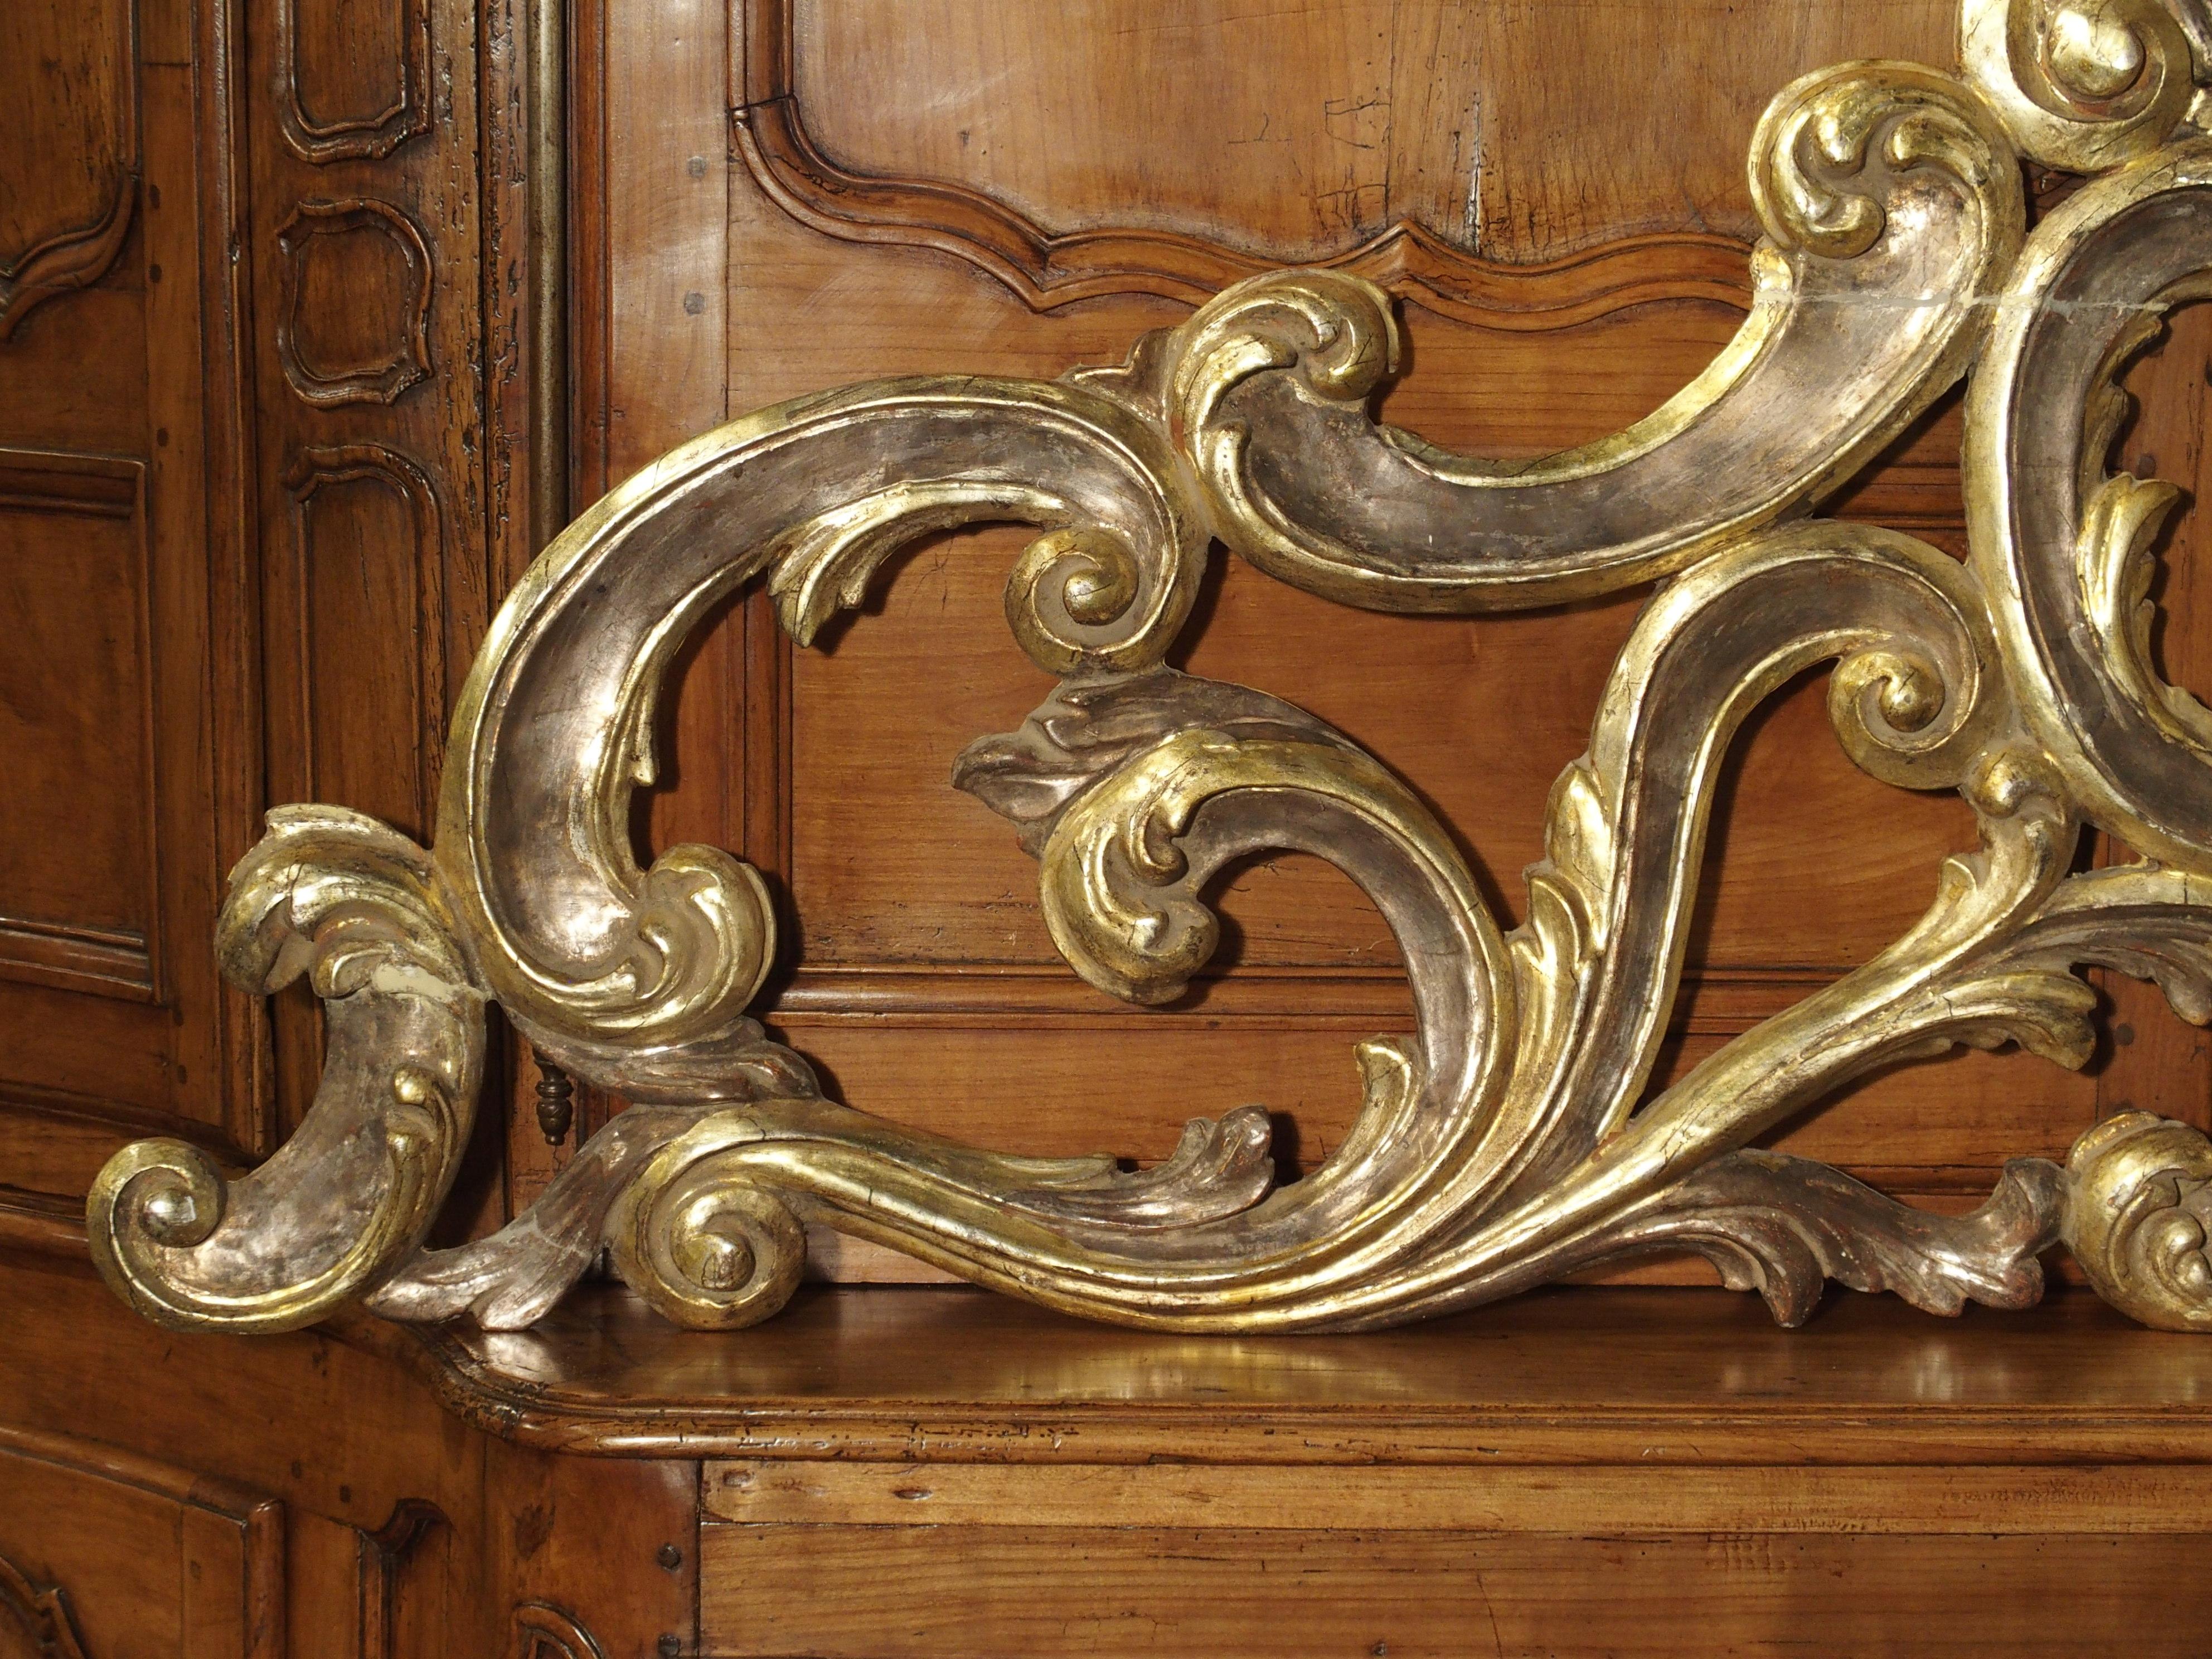 19th Century Sculpted Antique Giltwood Overdoor or Headboard from Italy, circa 1850